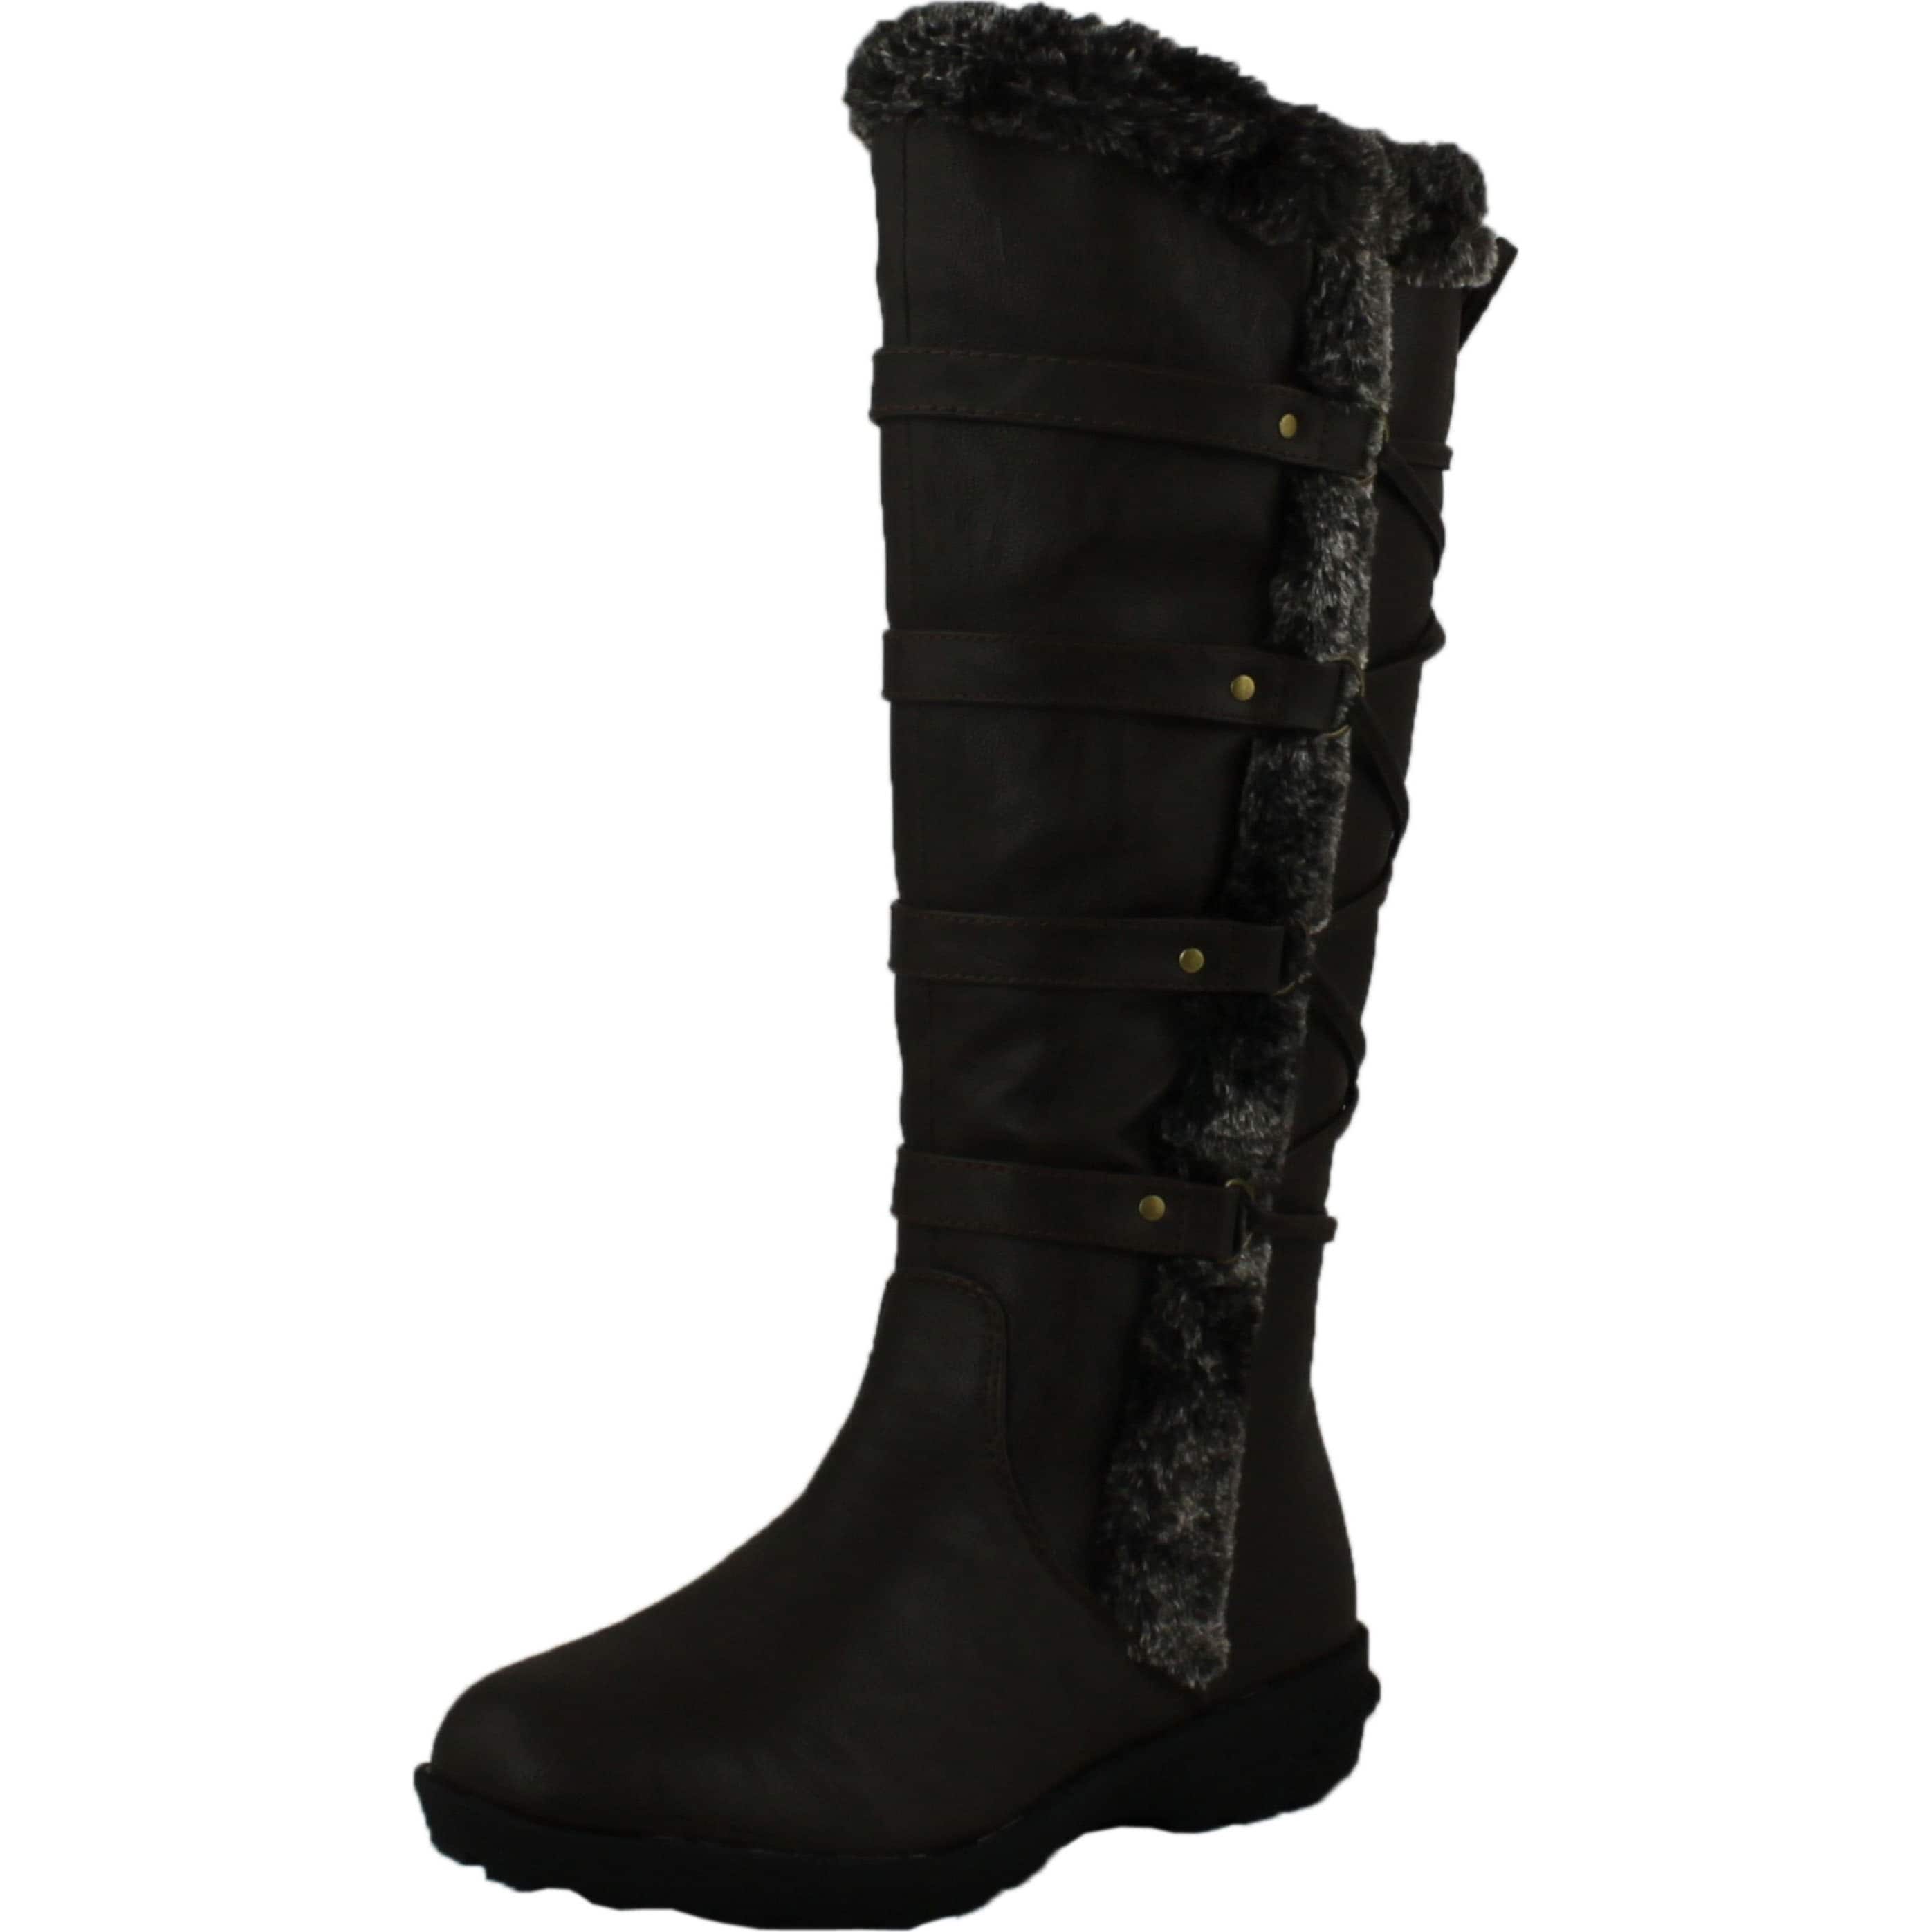 women's lace up knee high black boots